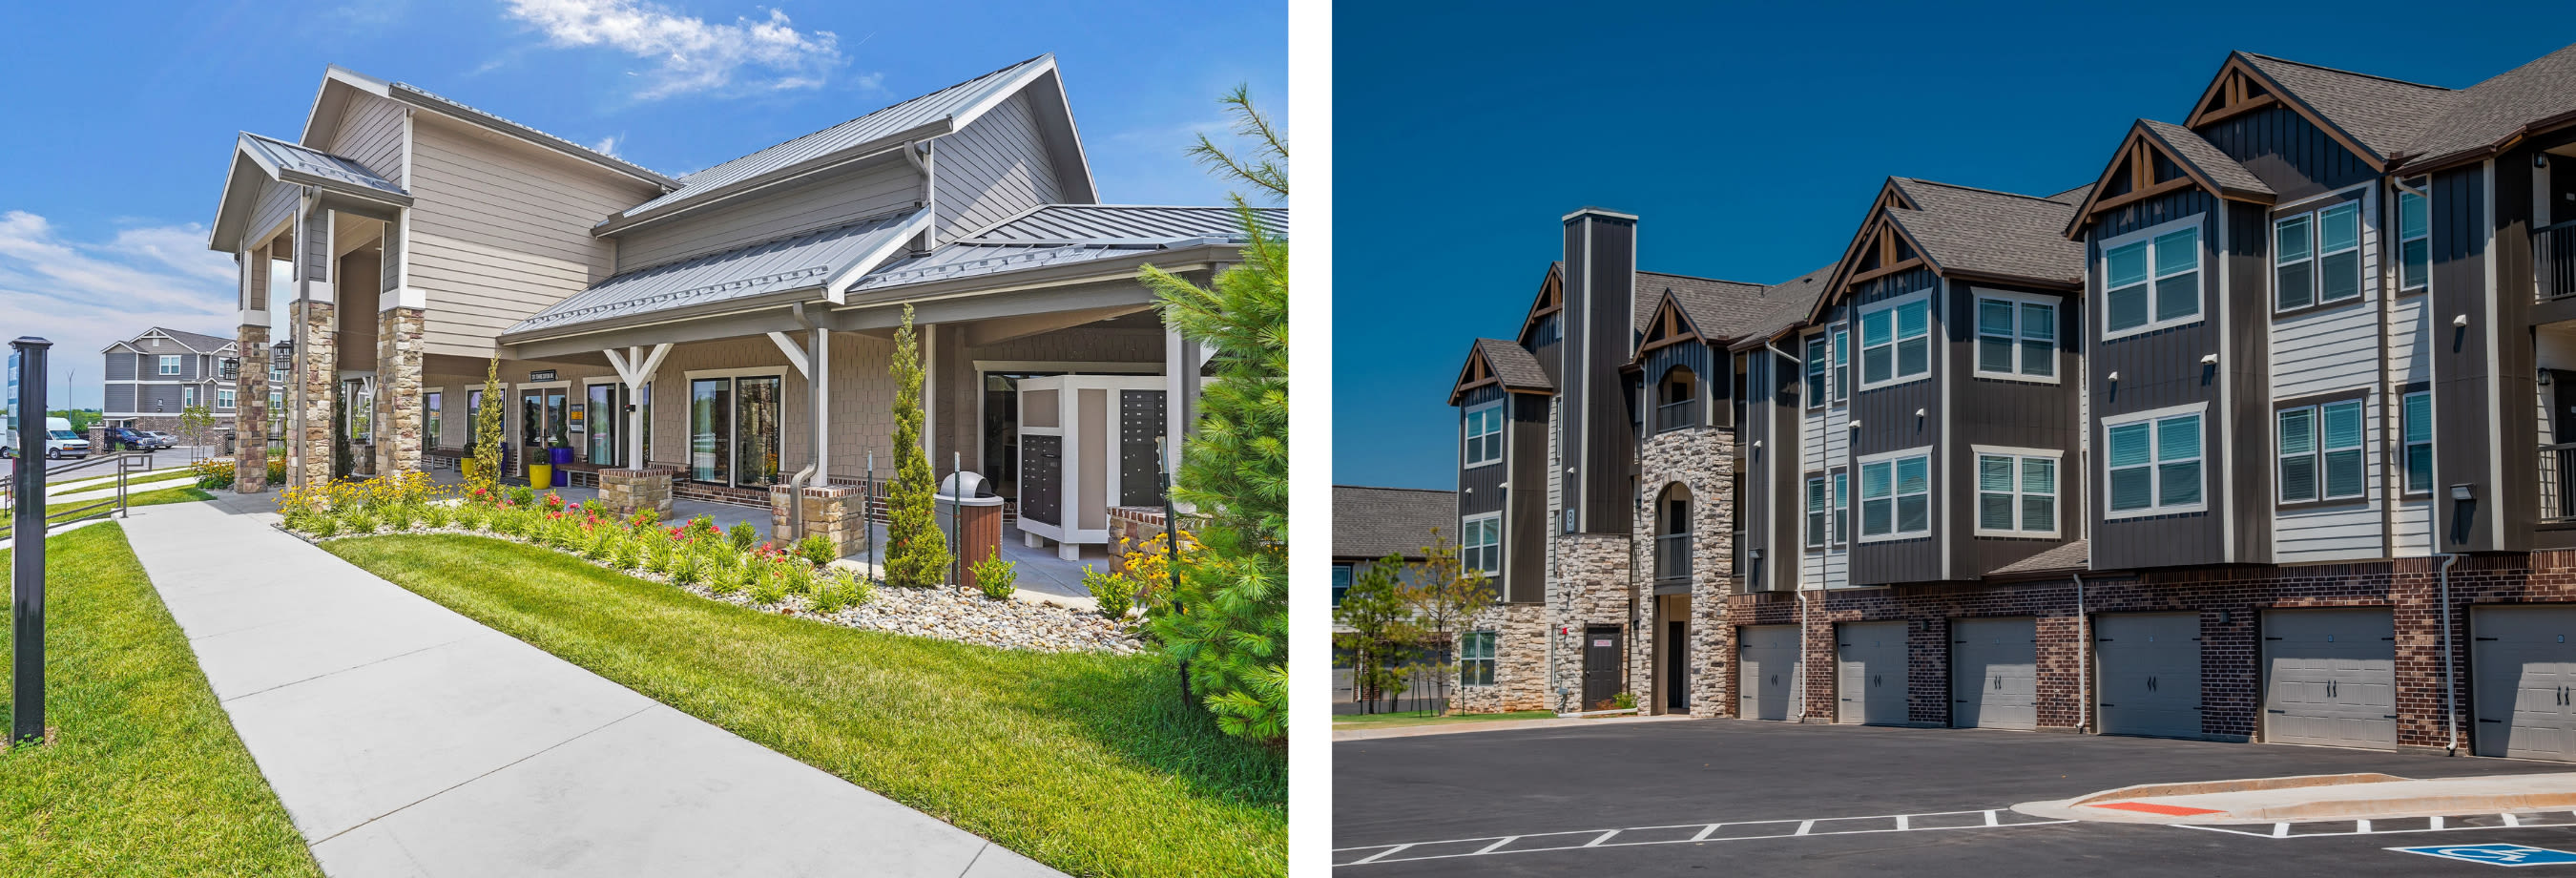 Exterior view of our newest properties, Ridge at 66 in Yukon, OK and Chisholm Pointe in OKC, OK.